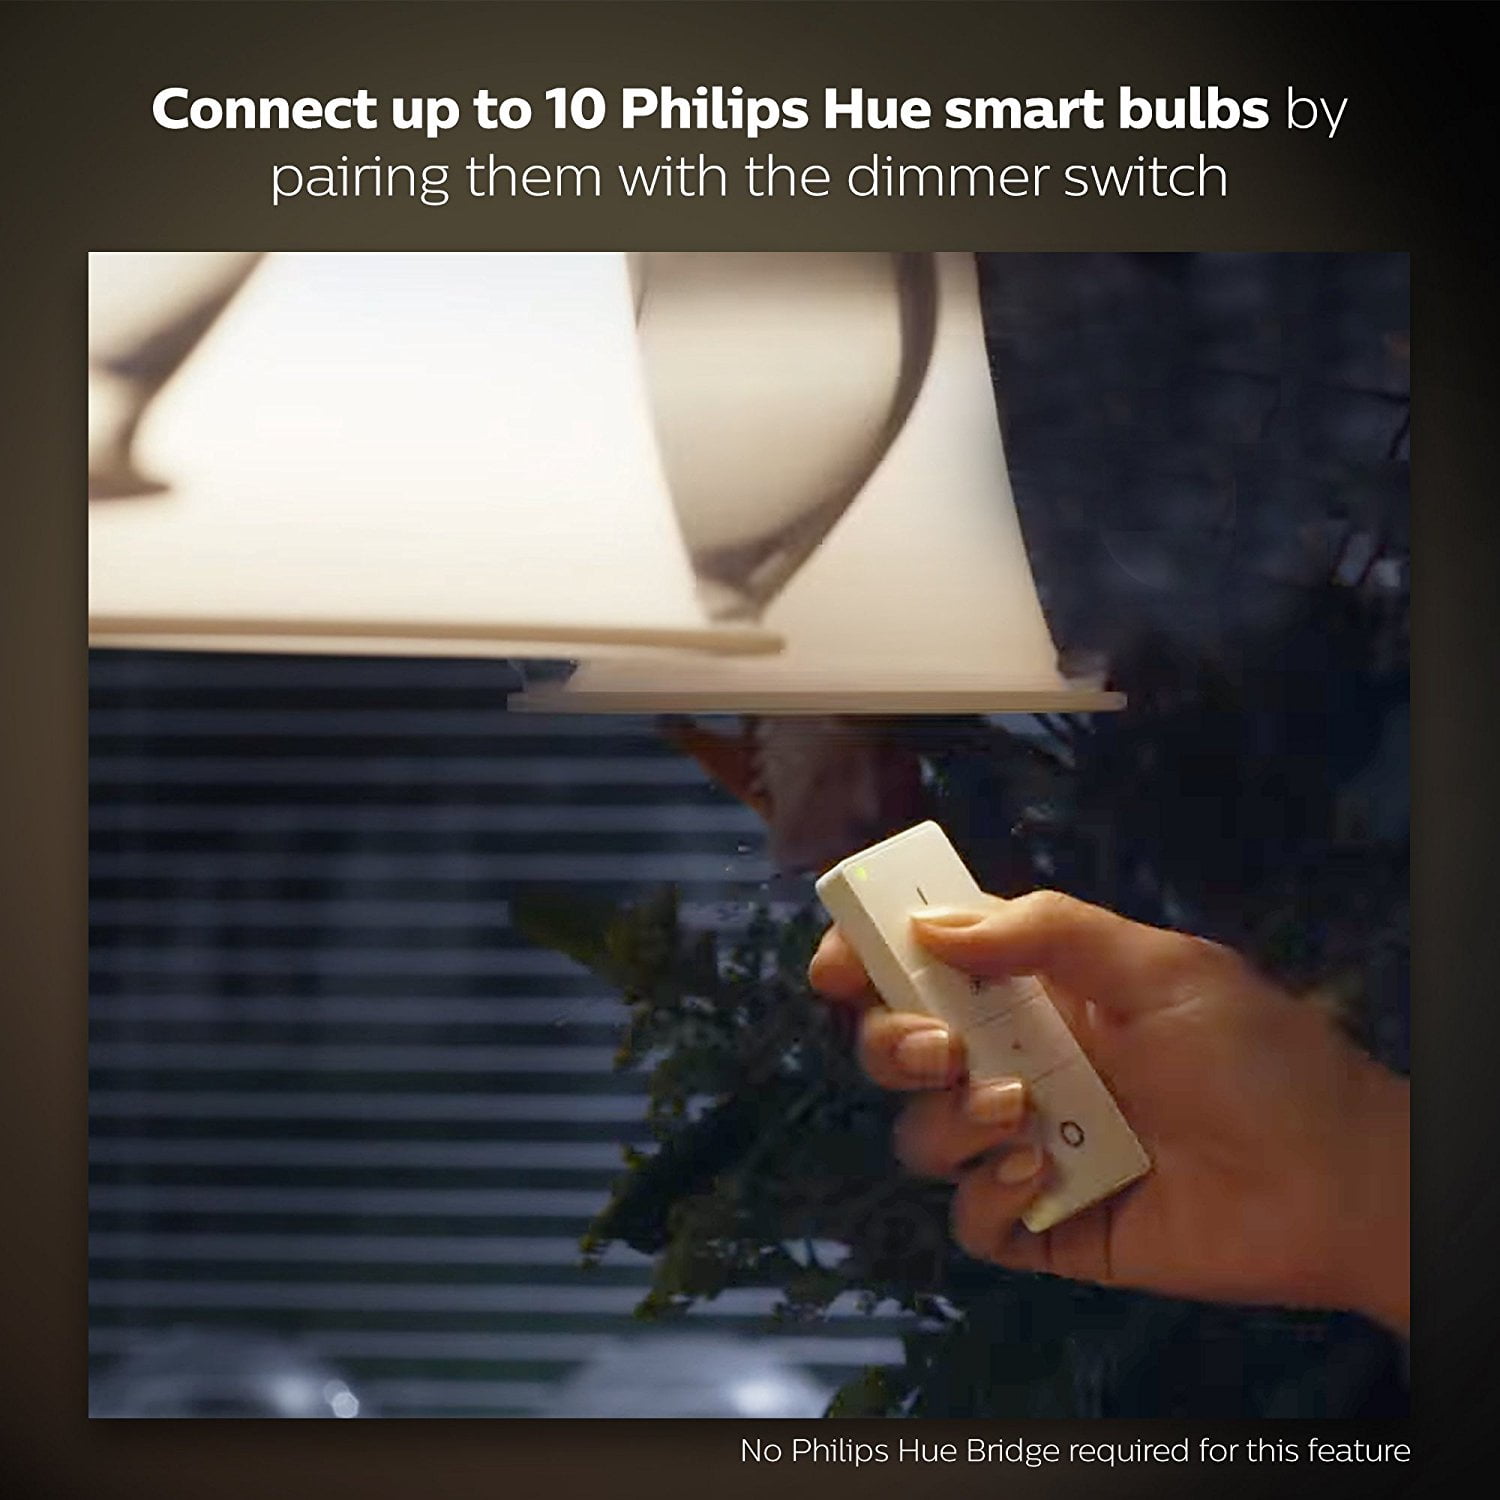 Installation-Free, Exclusive for Philips Hue Lights, Compatible with  Alexa, Apple HomeKit and Google Assistant Philips Hue Smart Wireless Dimming Kit